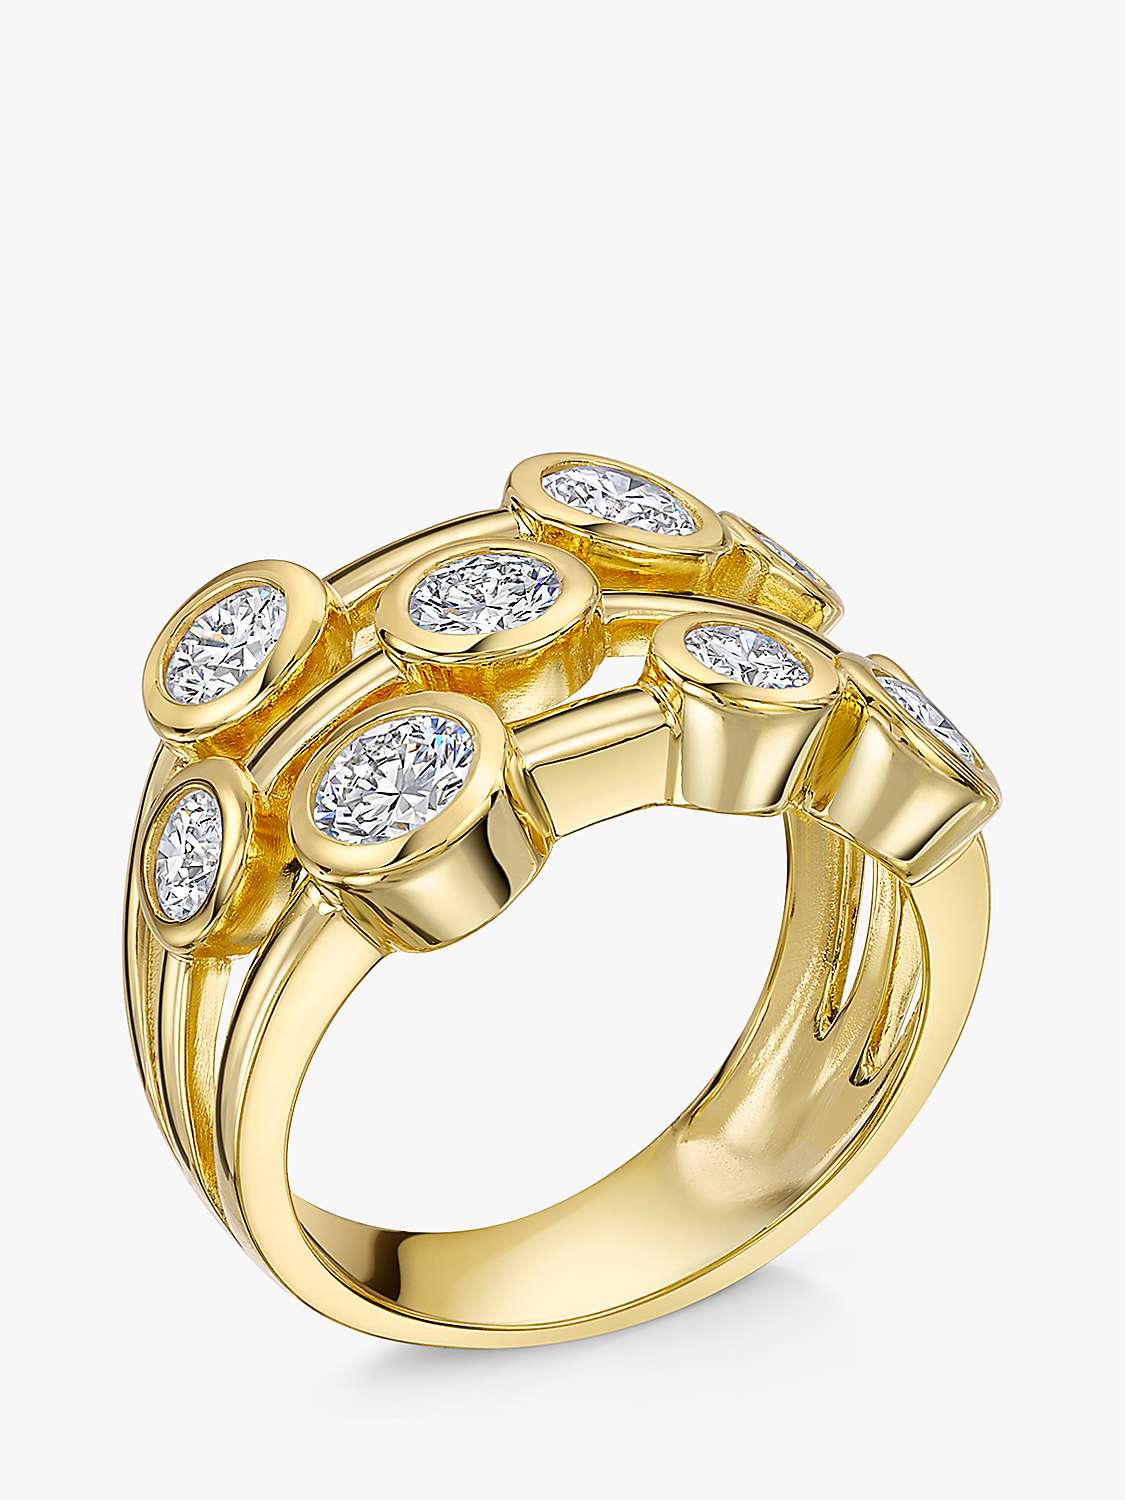 Buy Jools by Jenny Brown 9 Stone Cubic Zirconia Bubble Ring, Gold Online at johnlewis.com